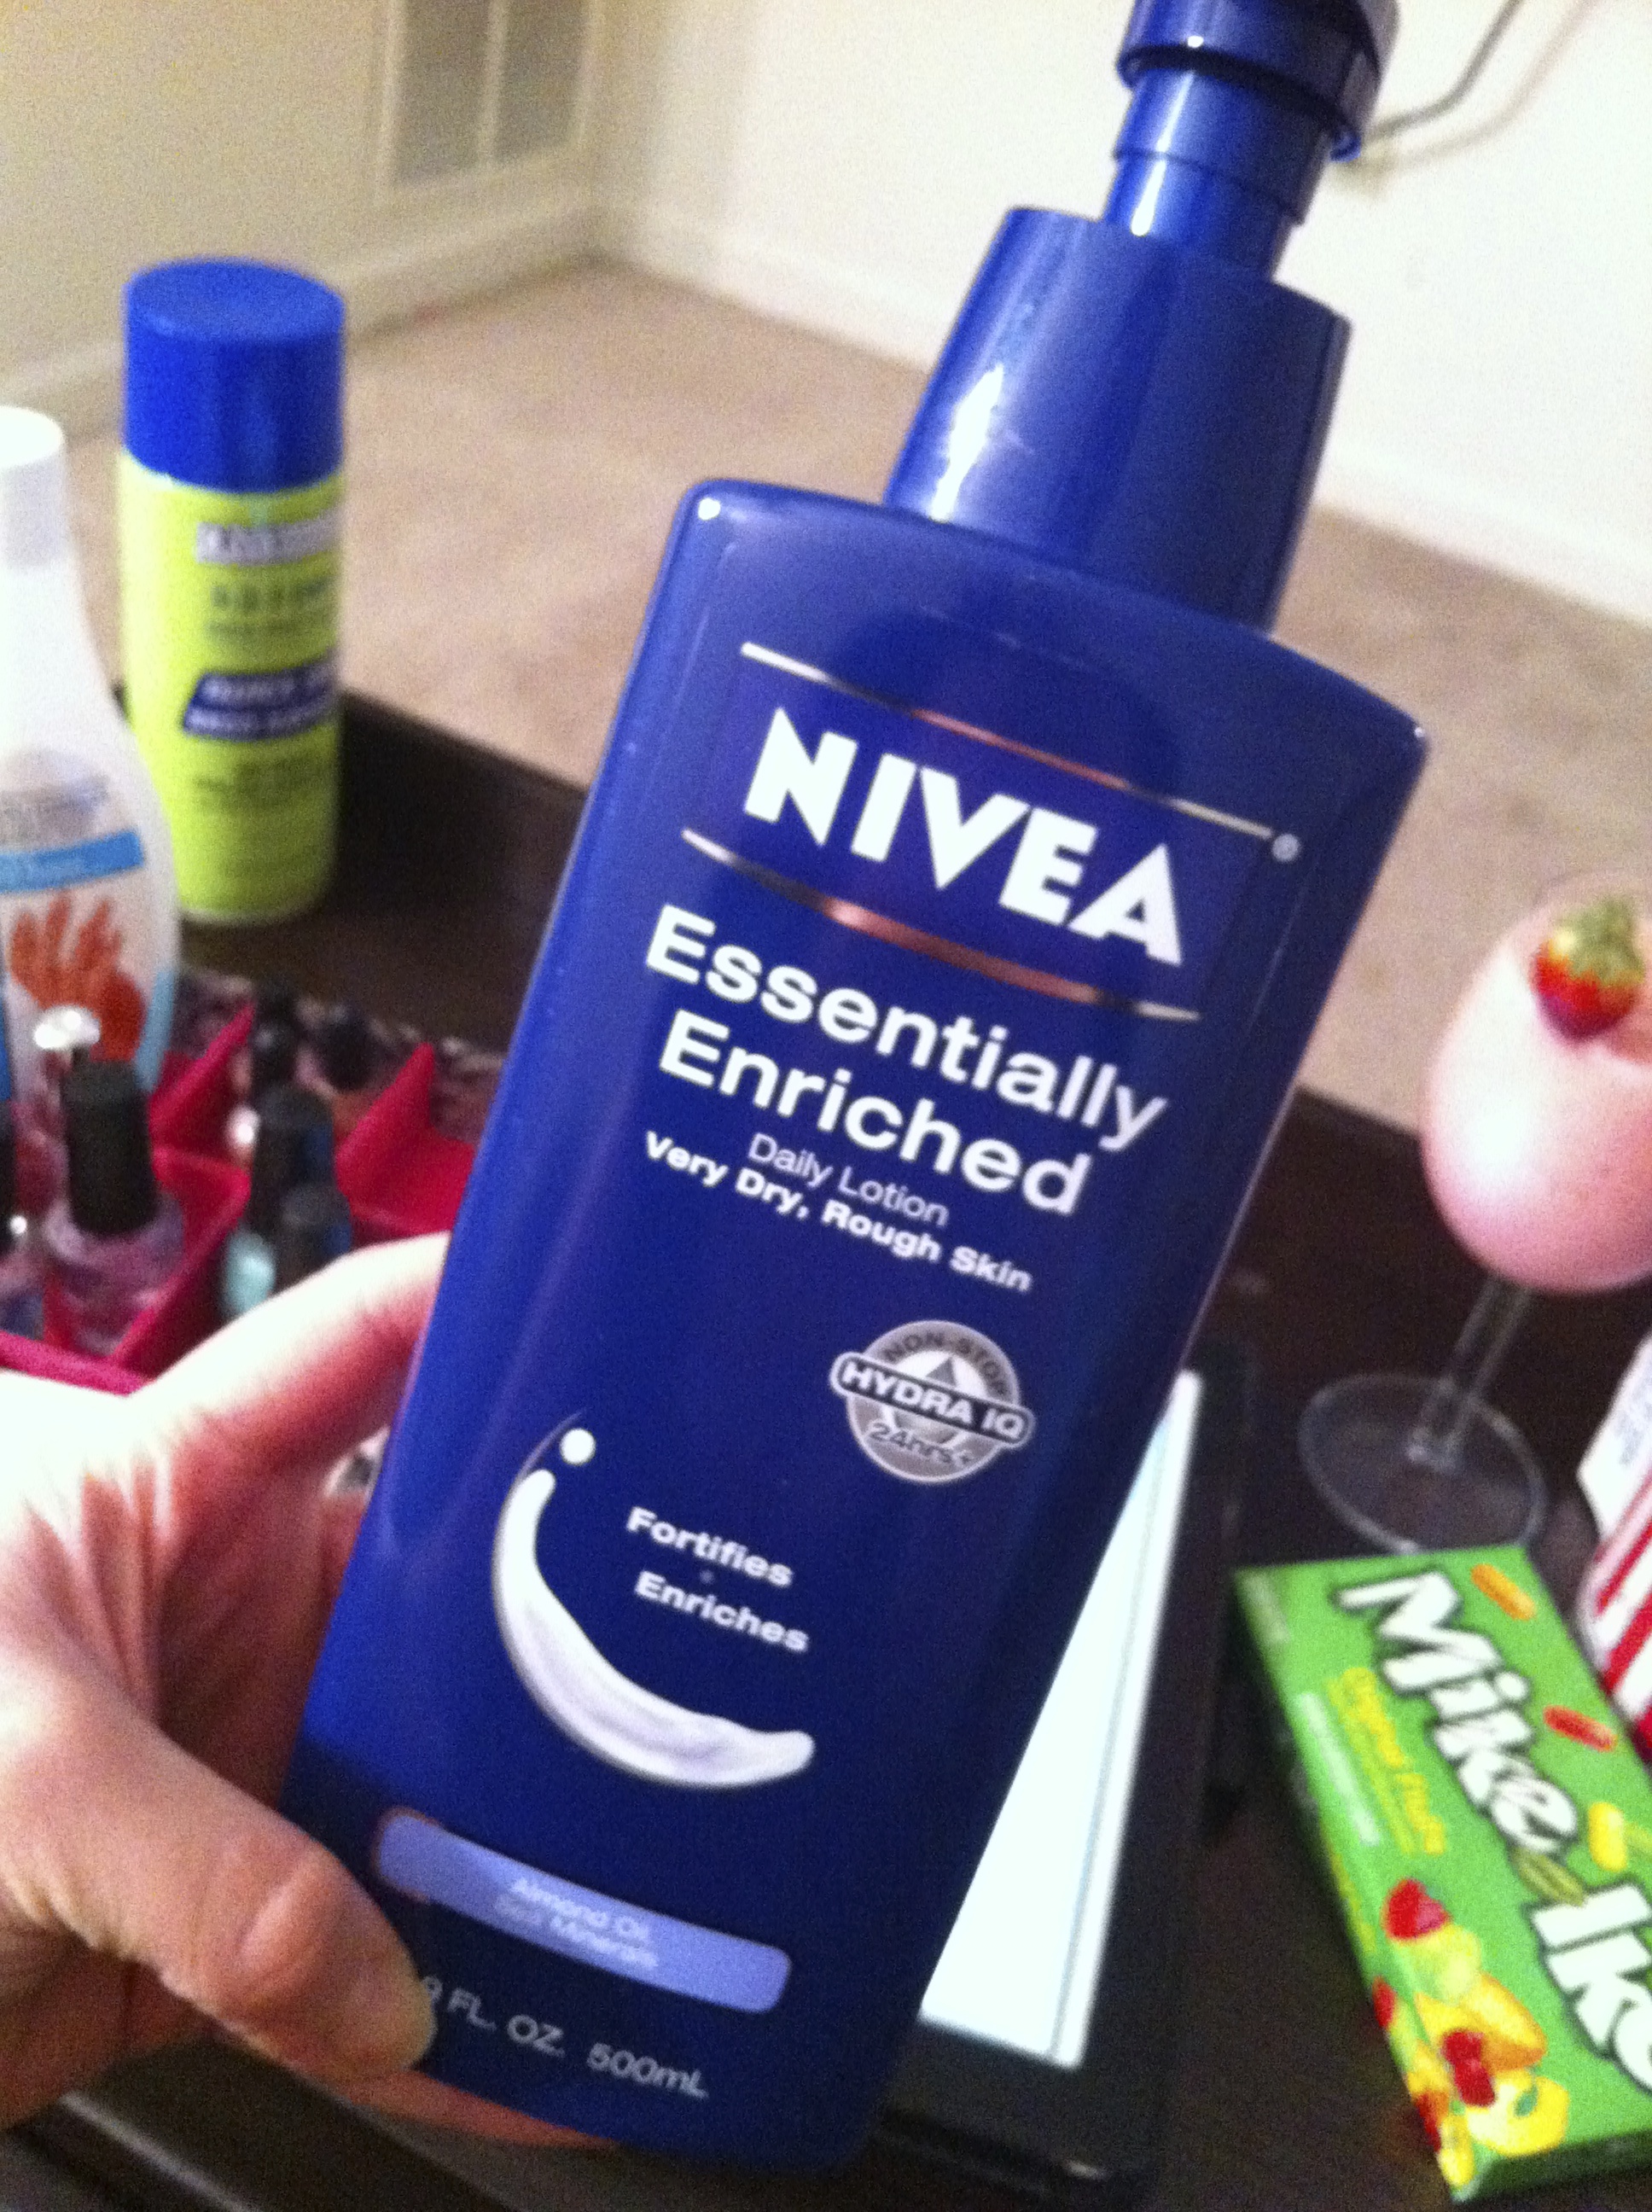 NIVEA Essentially Enriched Lotion